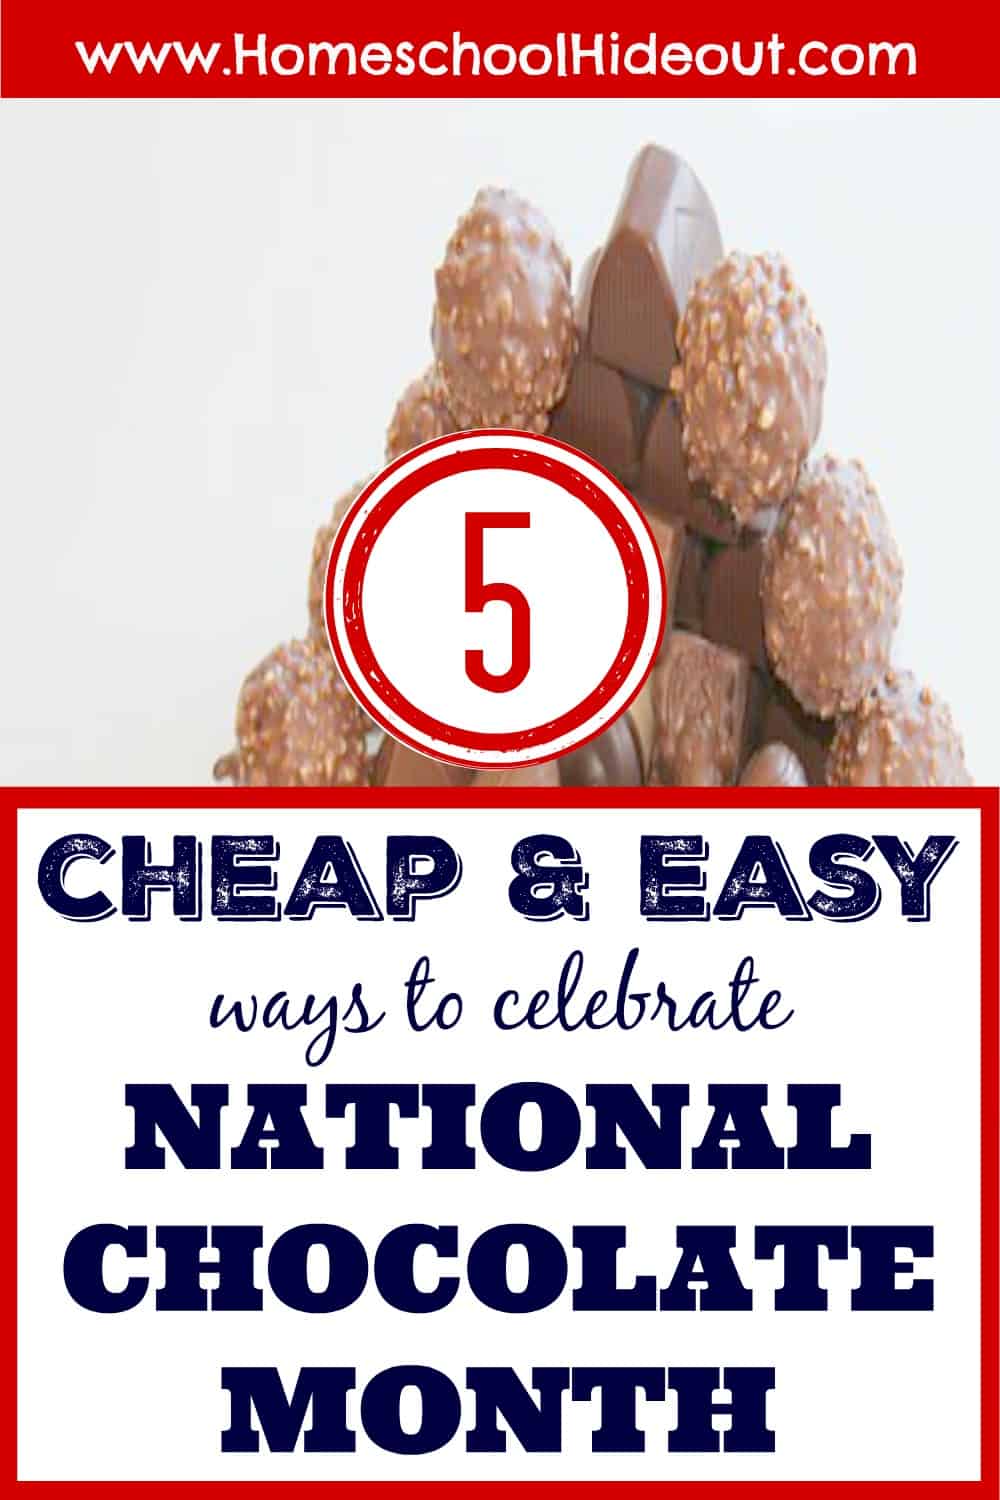 Love these ideas to celebrate National Chocolate Month! I spent less than $5 and bought enough chocolate for an entire day's school!